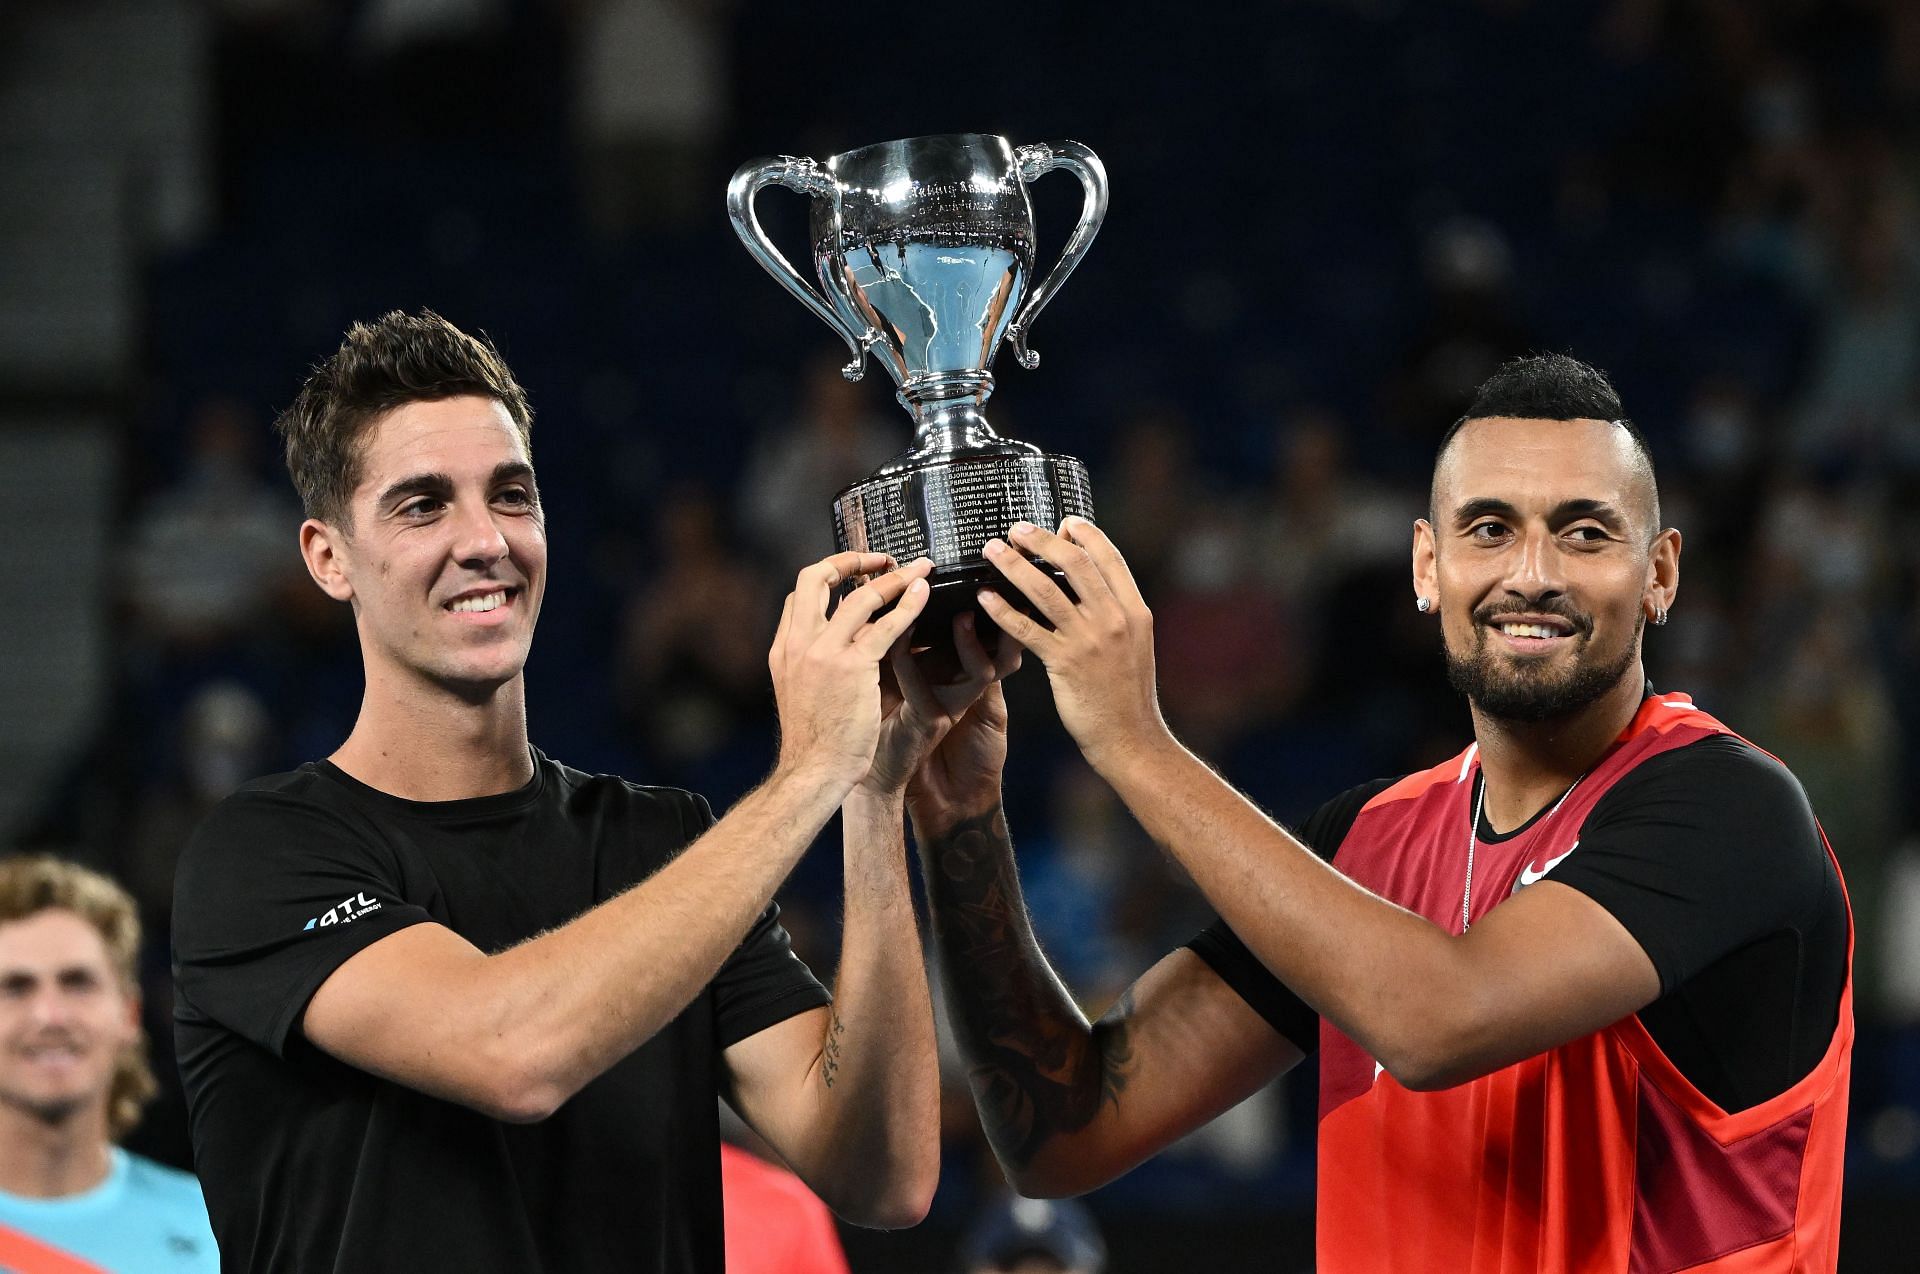 Thanasi Kokkinakis(left) and Nick Kyrgios(right) with the 2022 Australian Open doubles trophy